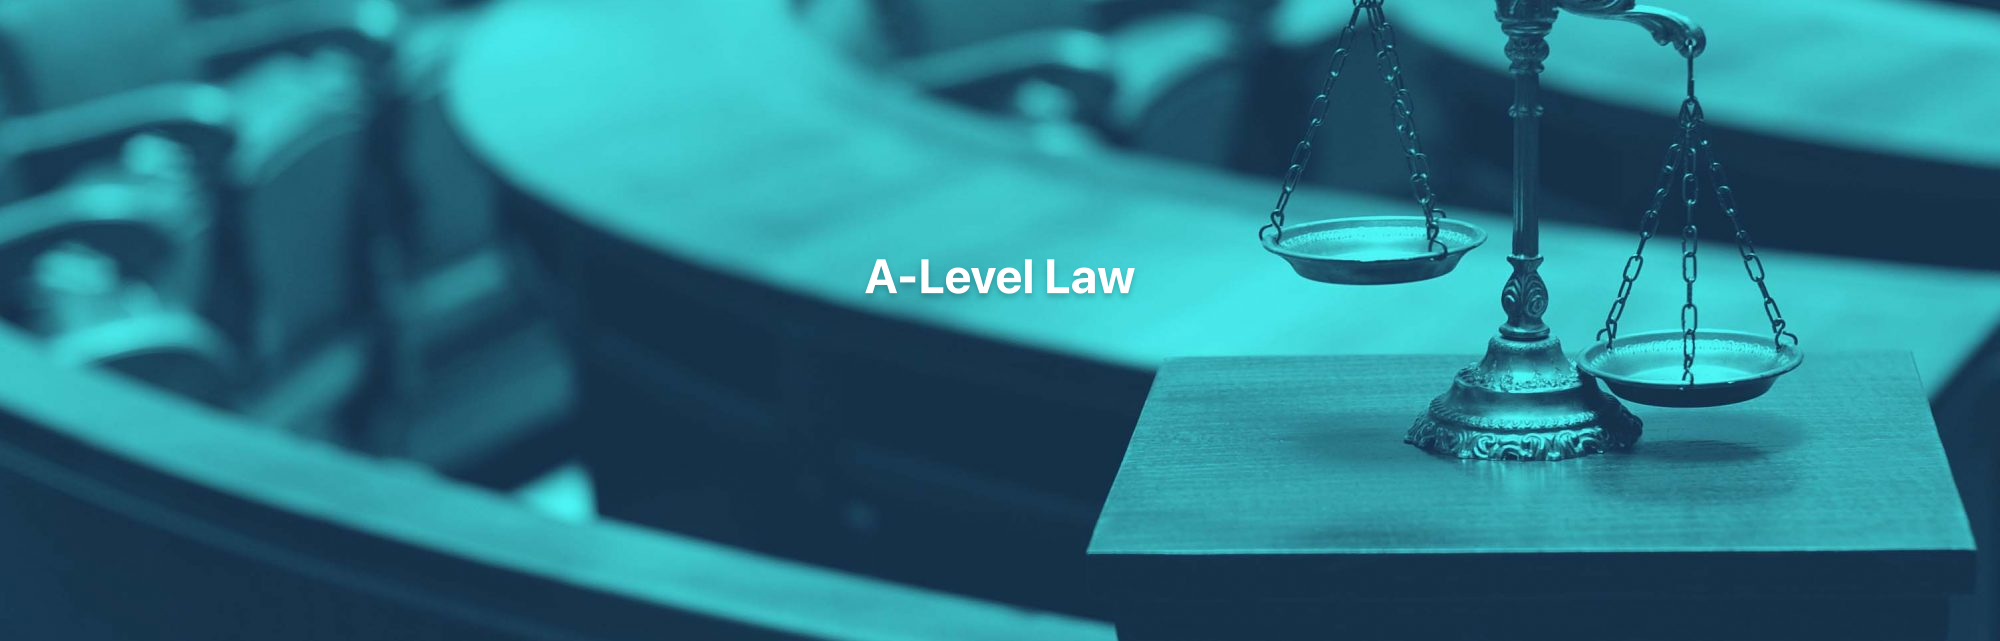 A-Level Law Distance Learning Course by Oxbridge